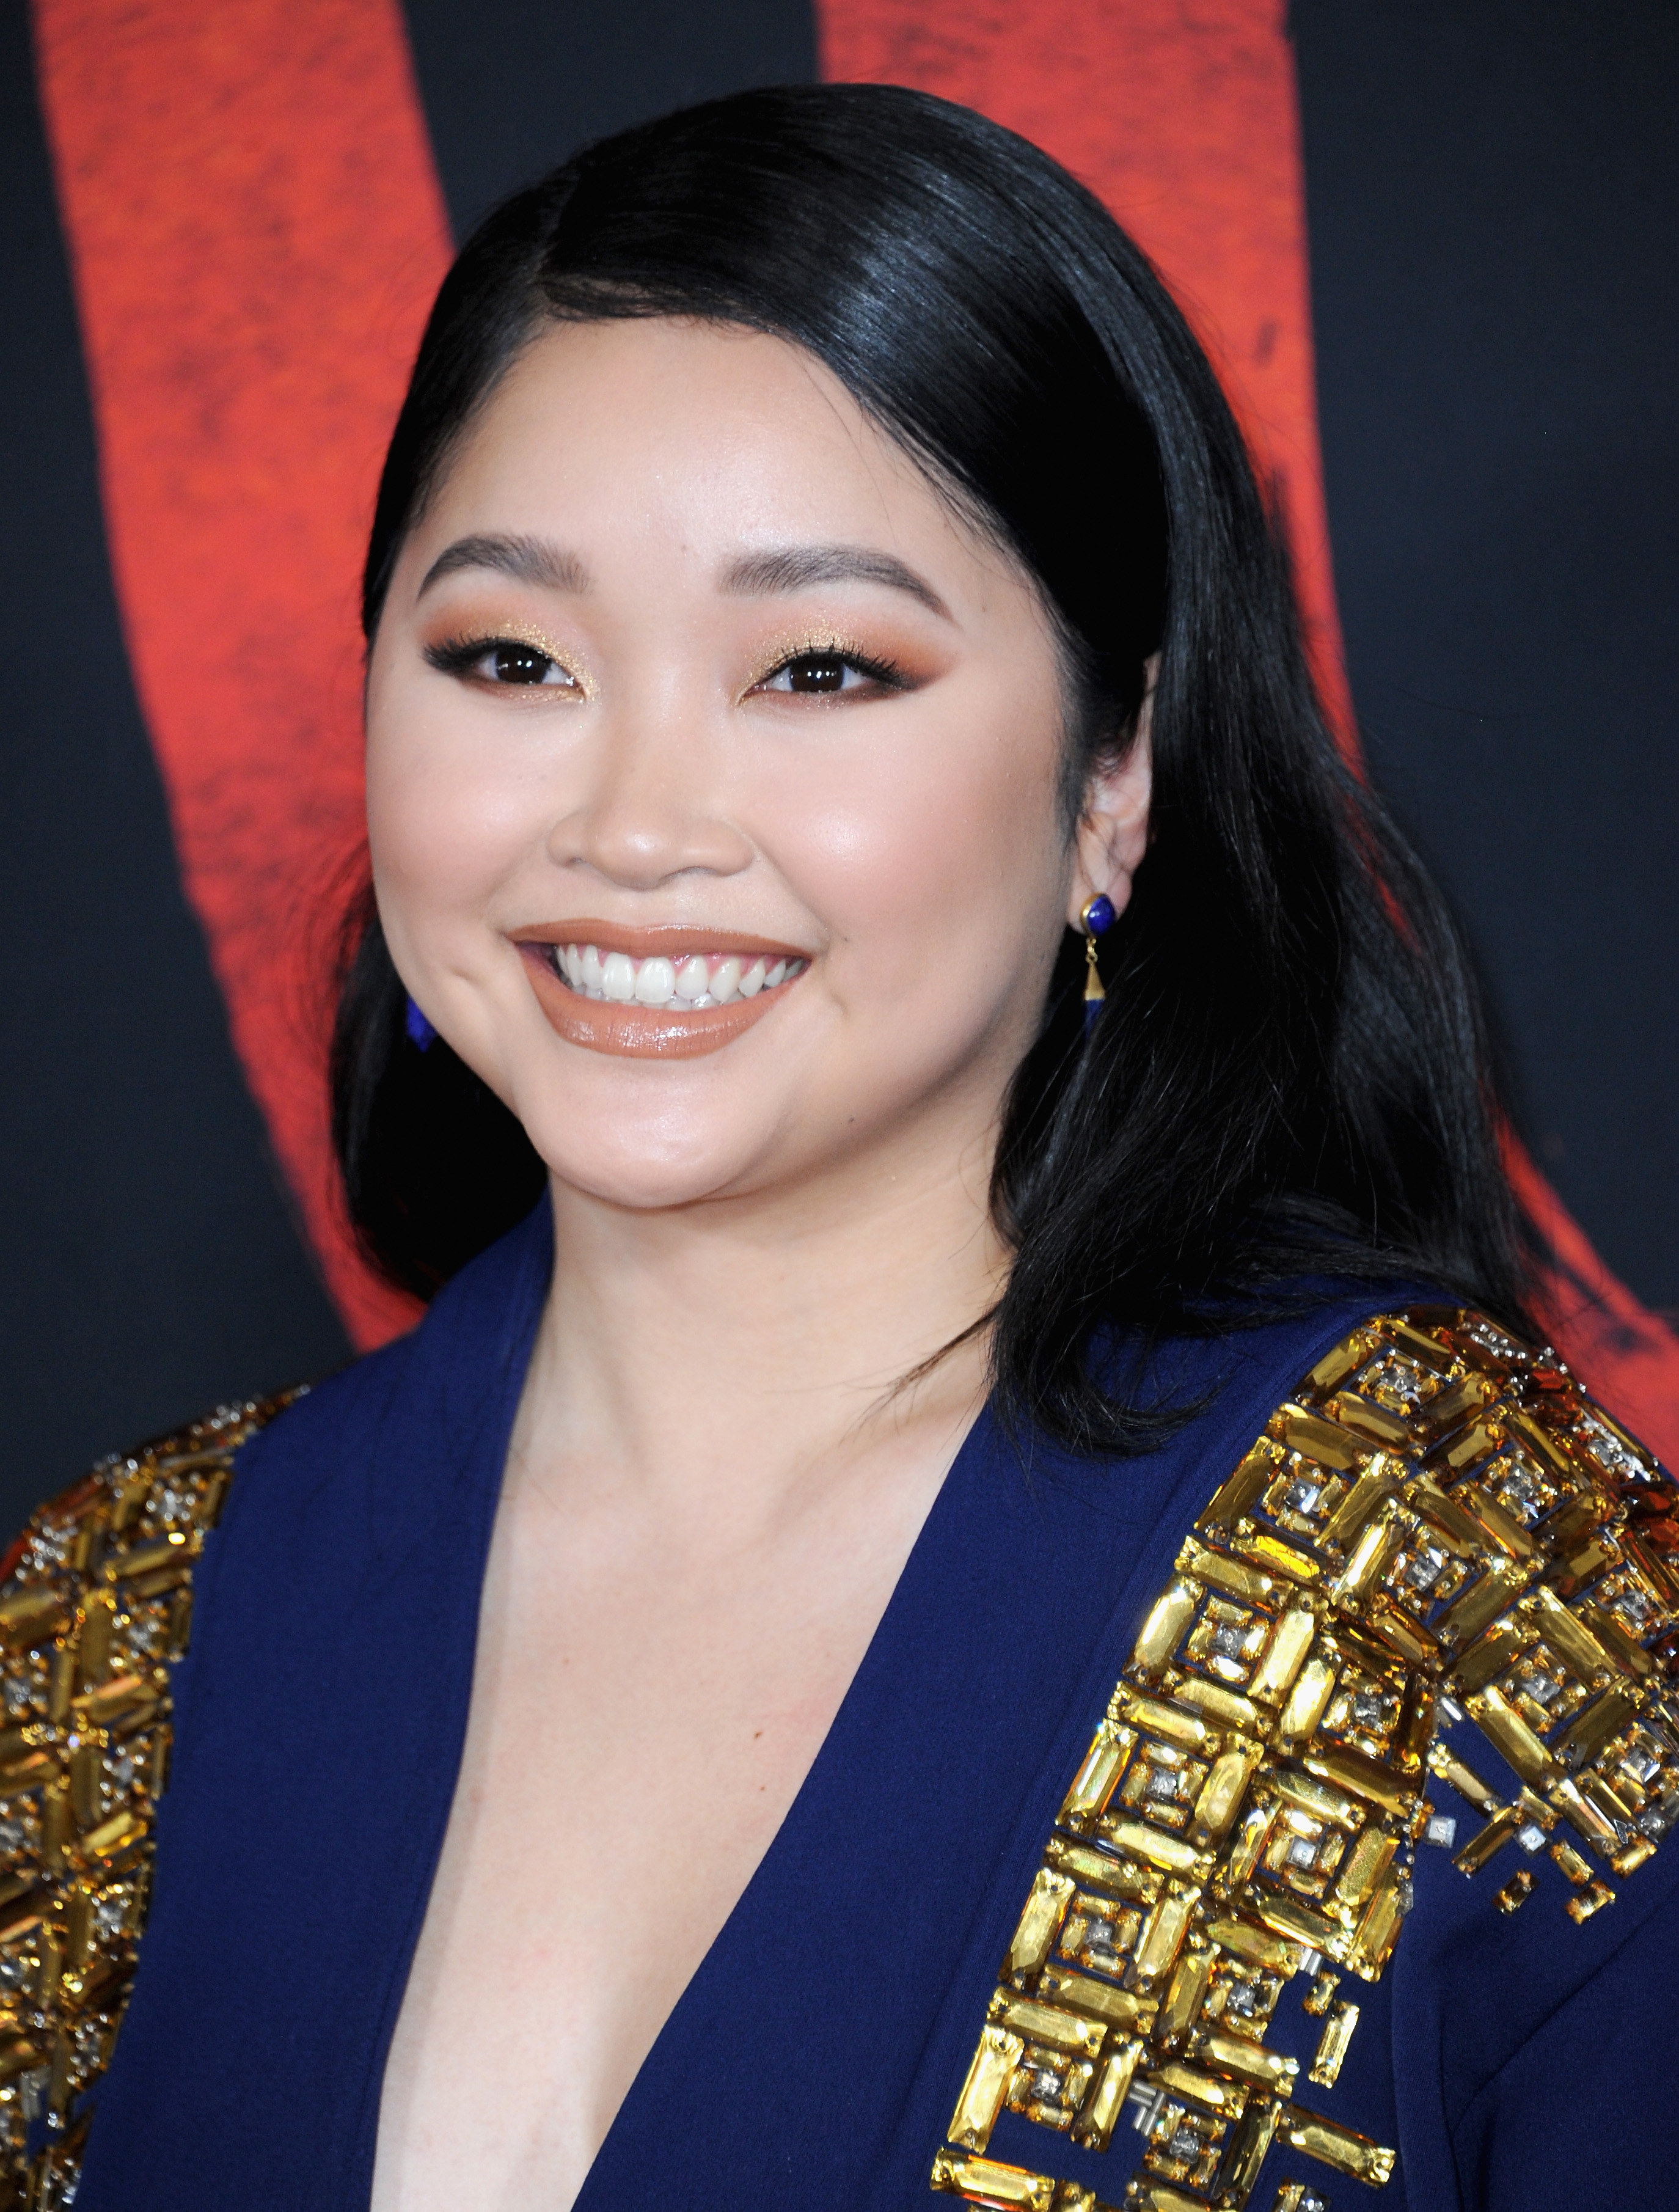 Lana Condor on the red carpet